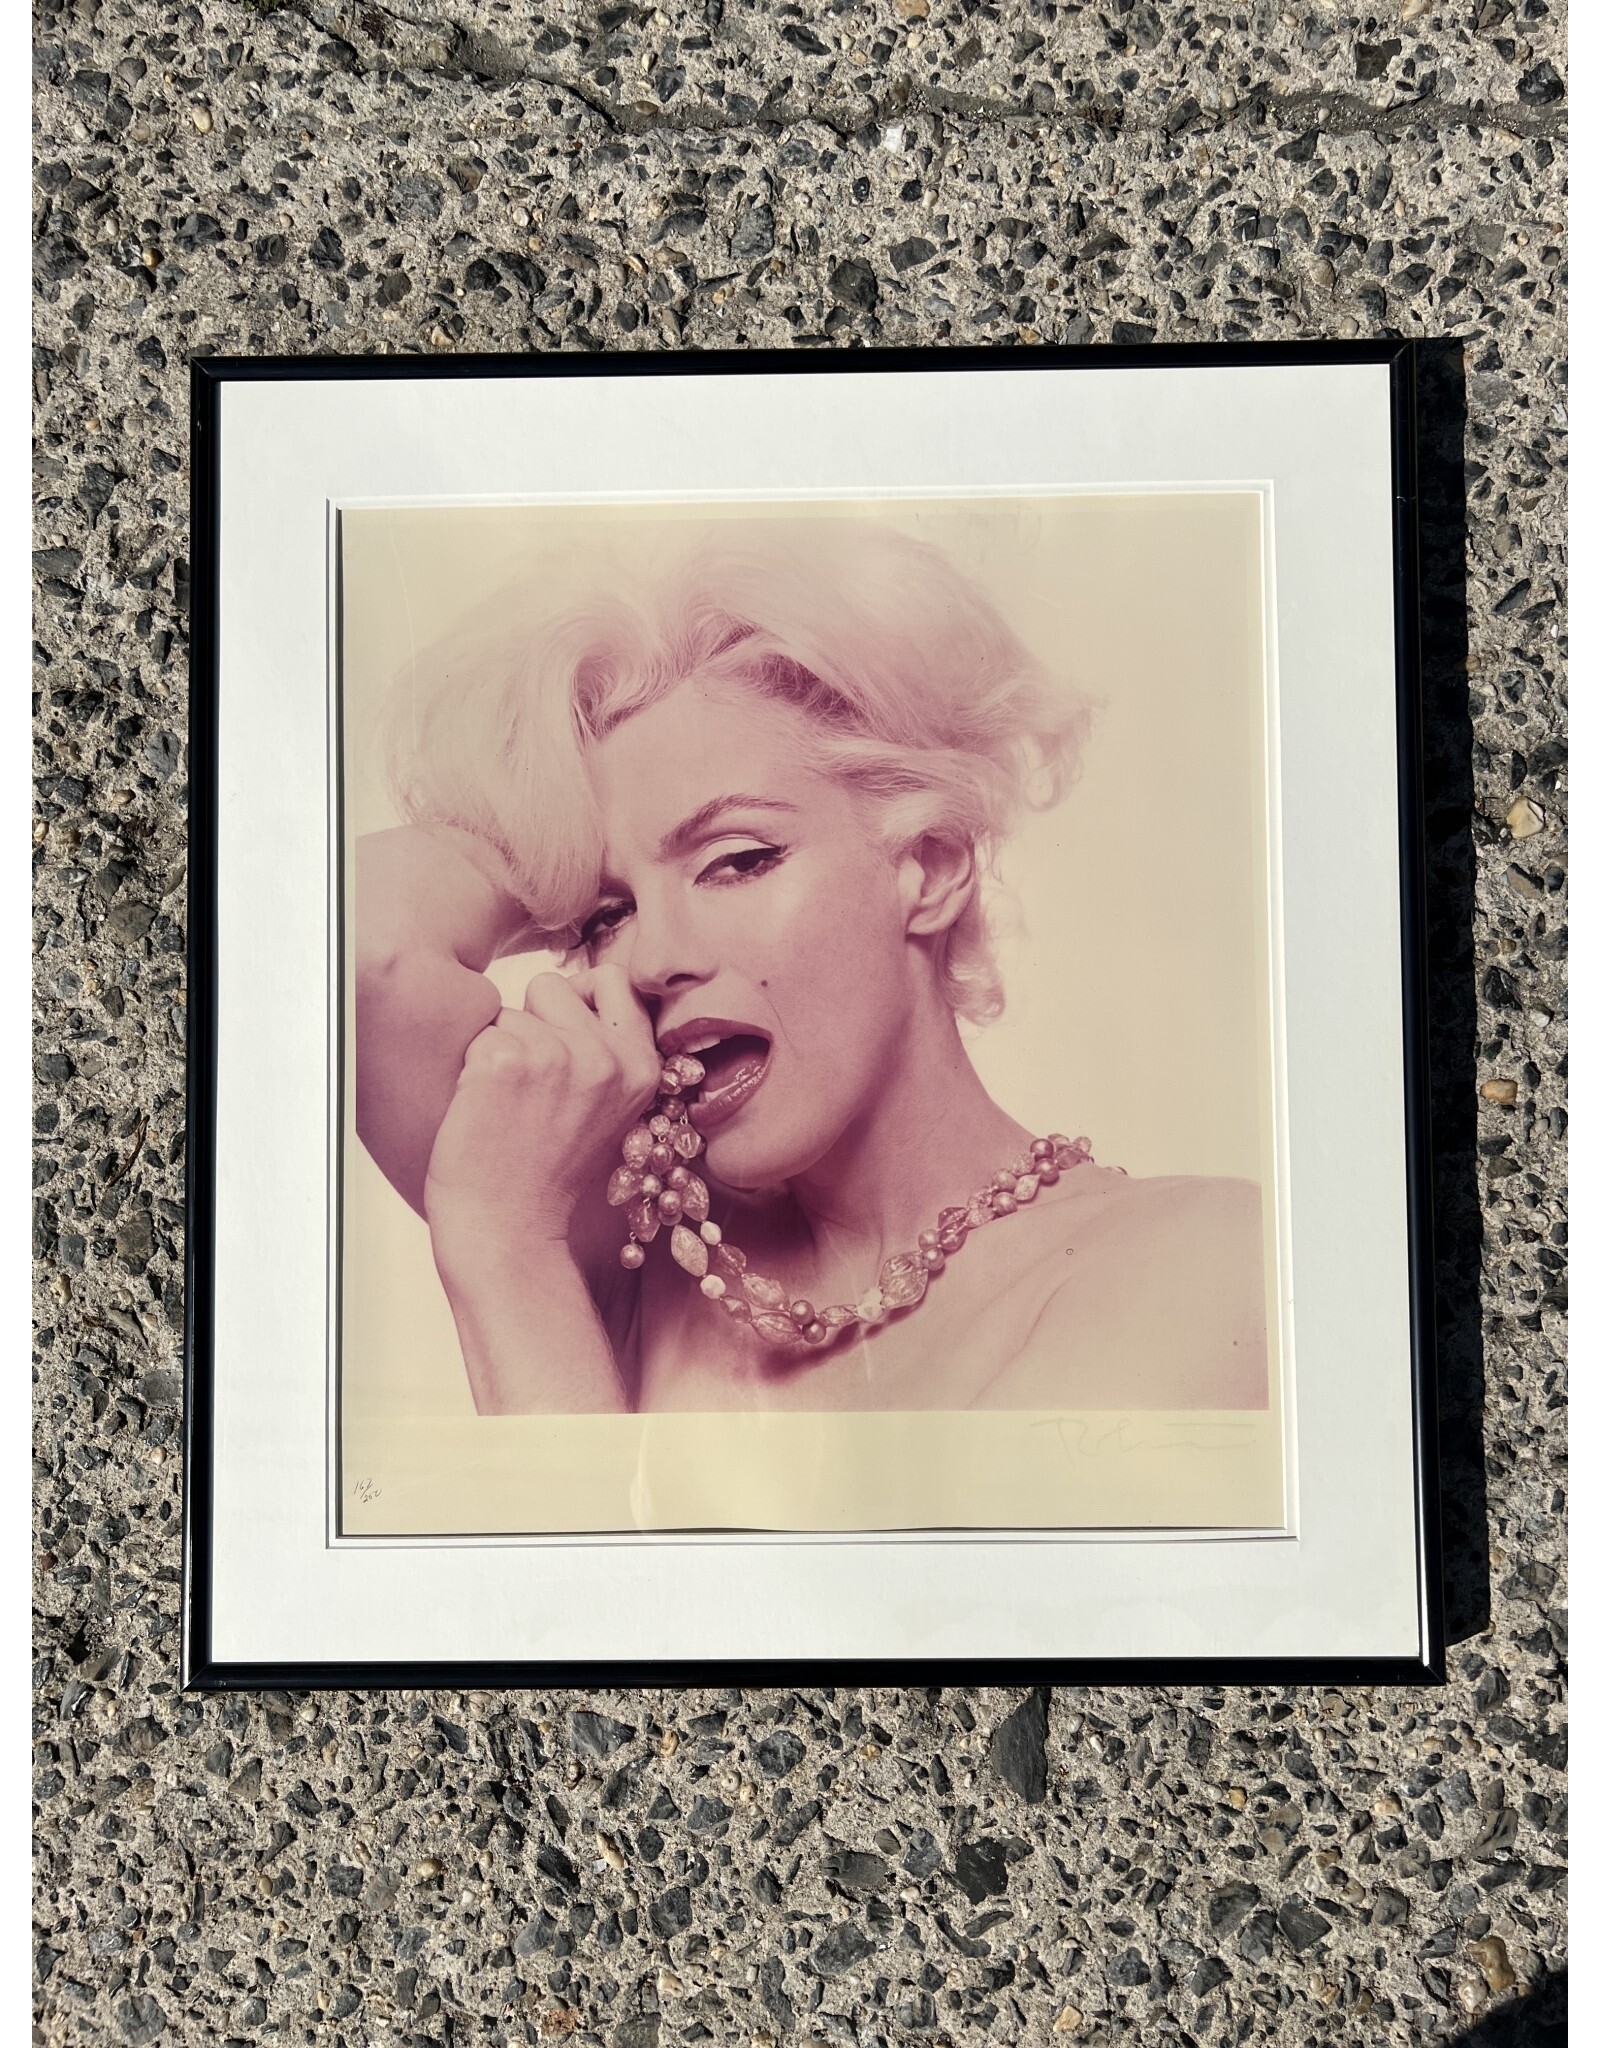 Marilyn Monroe Biting her Thumb, from The Last Sitting, ektacolor photograph by Bert Stern, signed, numbered 167/200